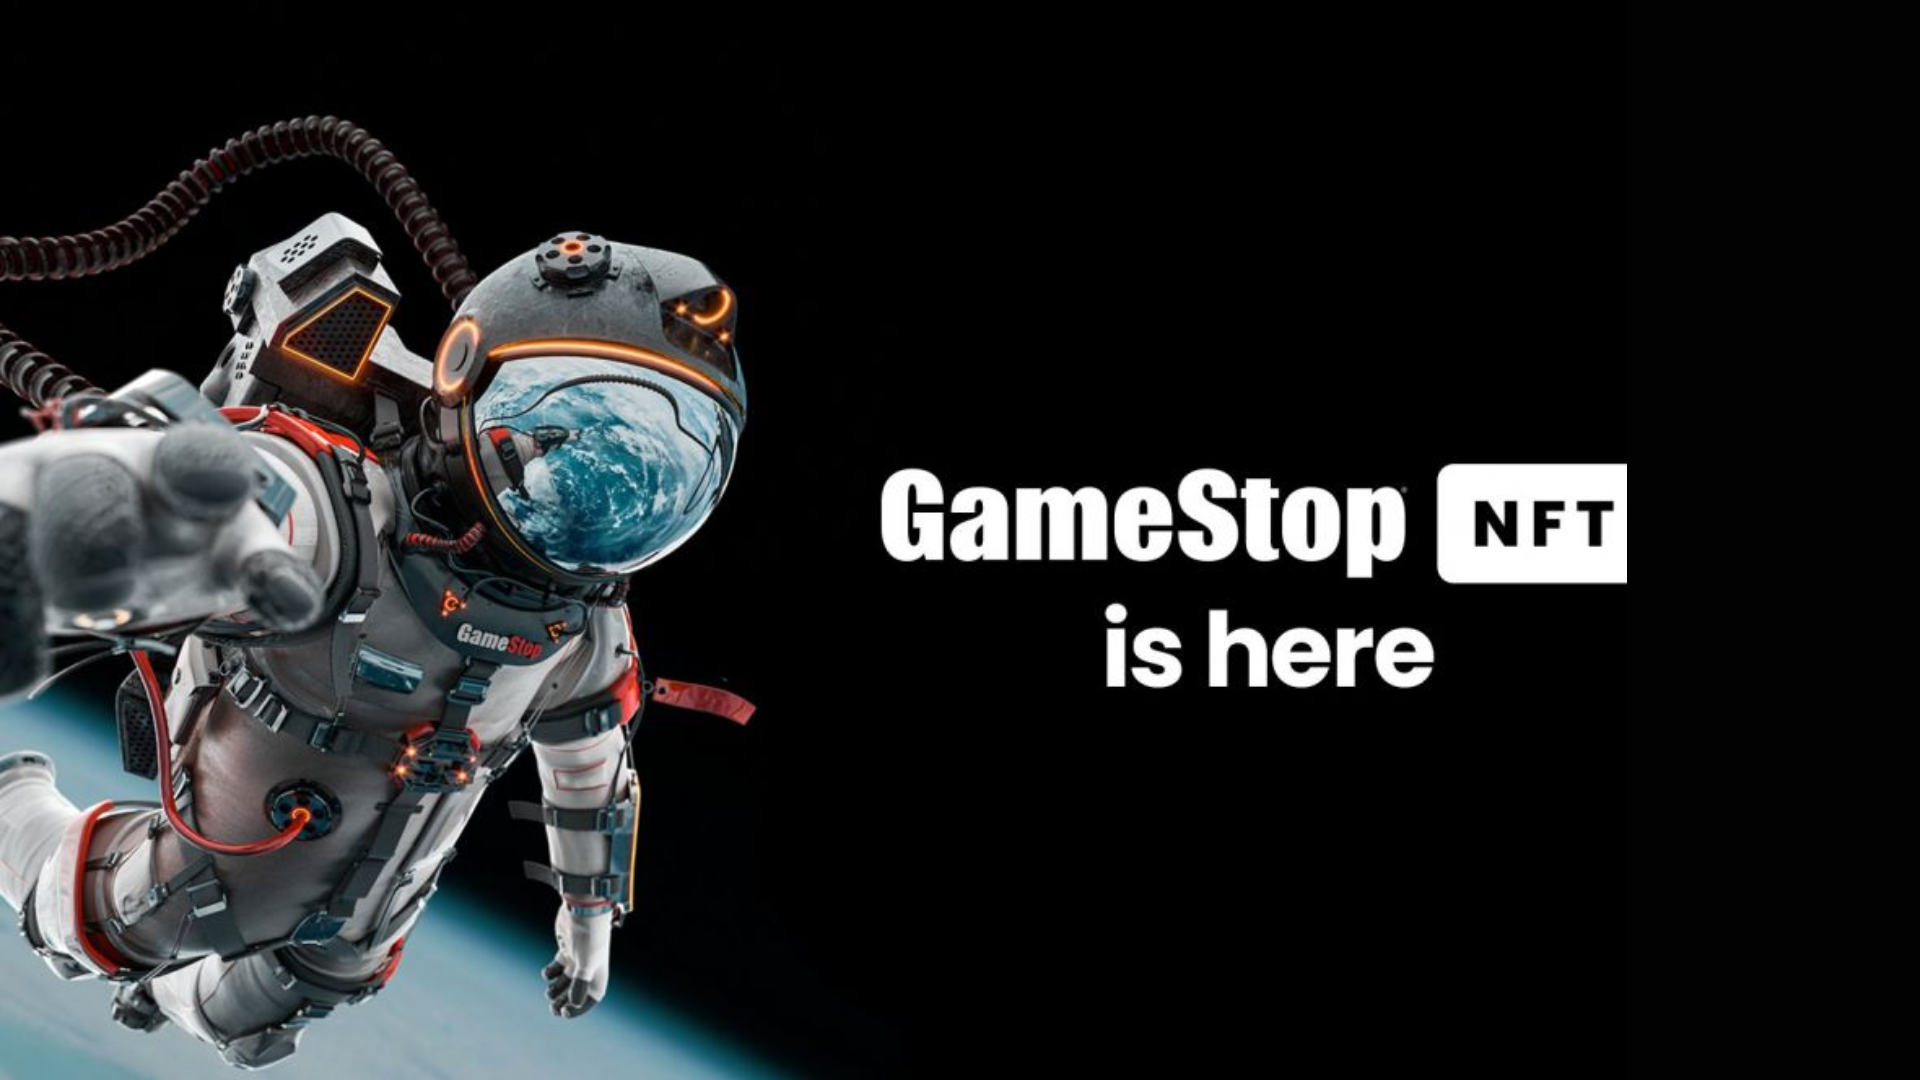 Introduction to gamestop nft marketplace